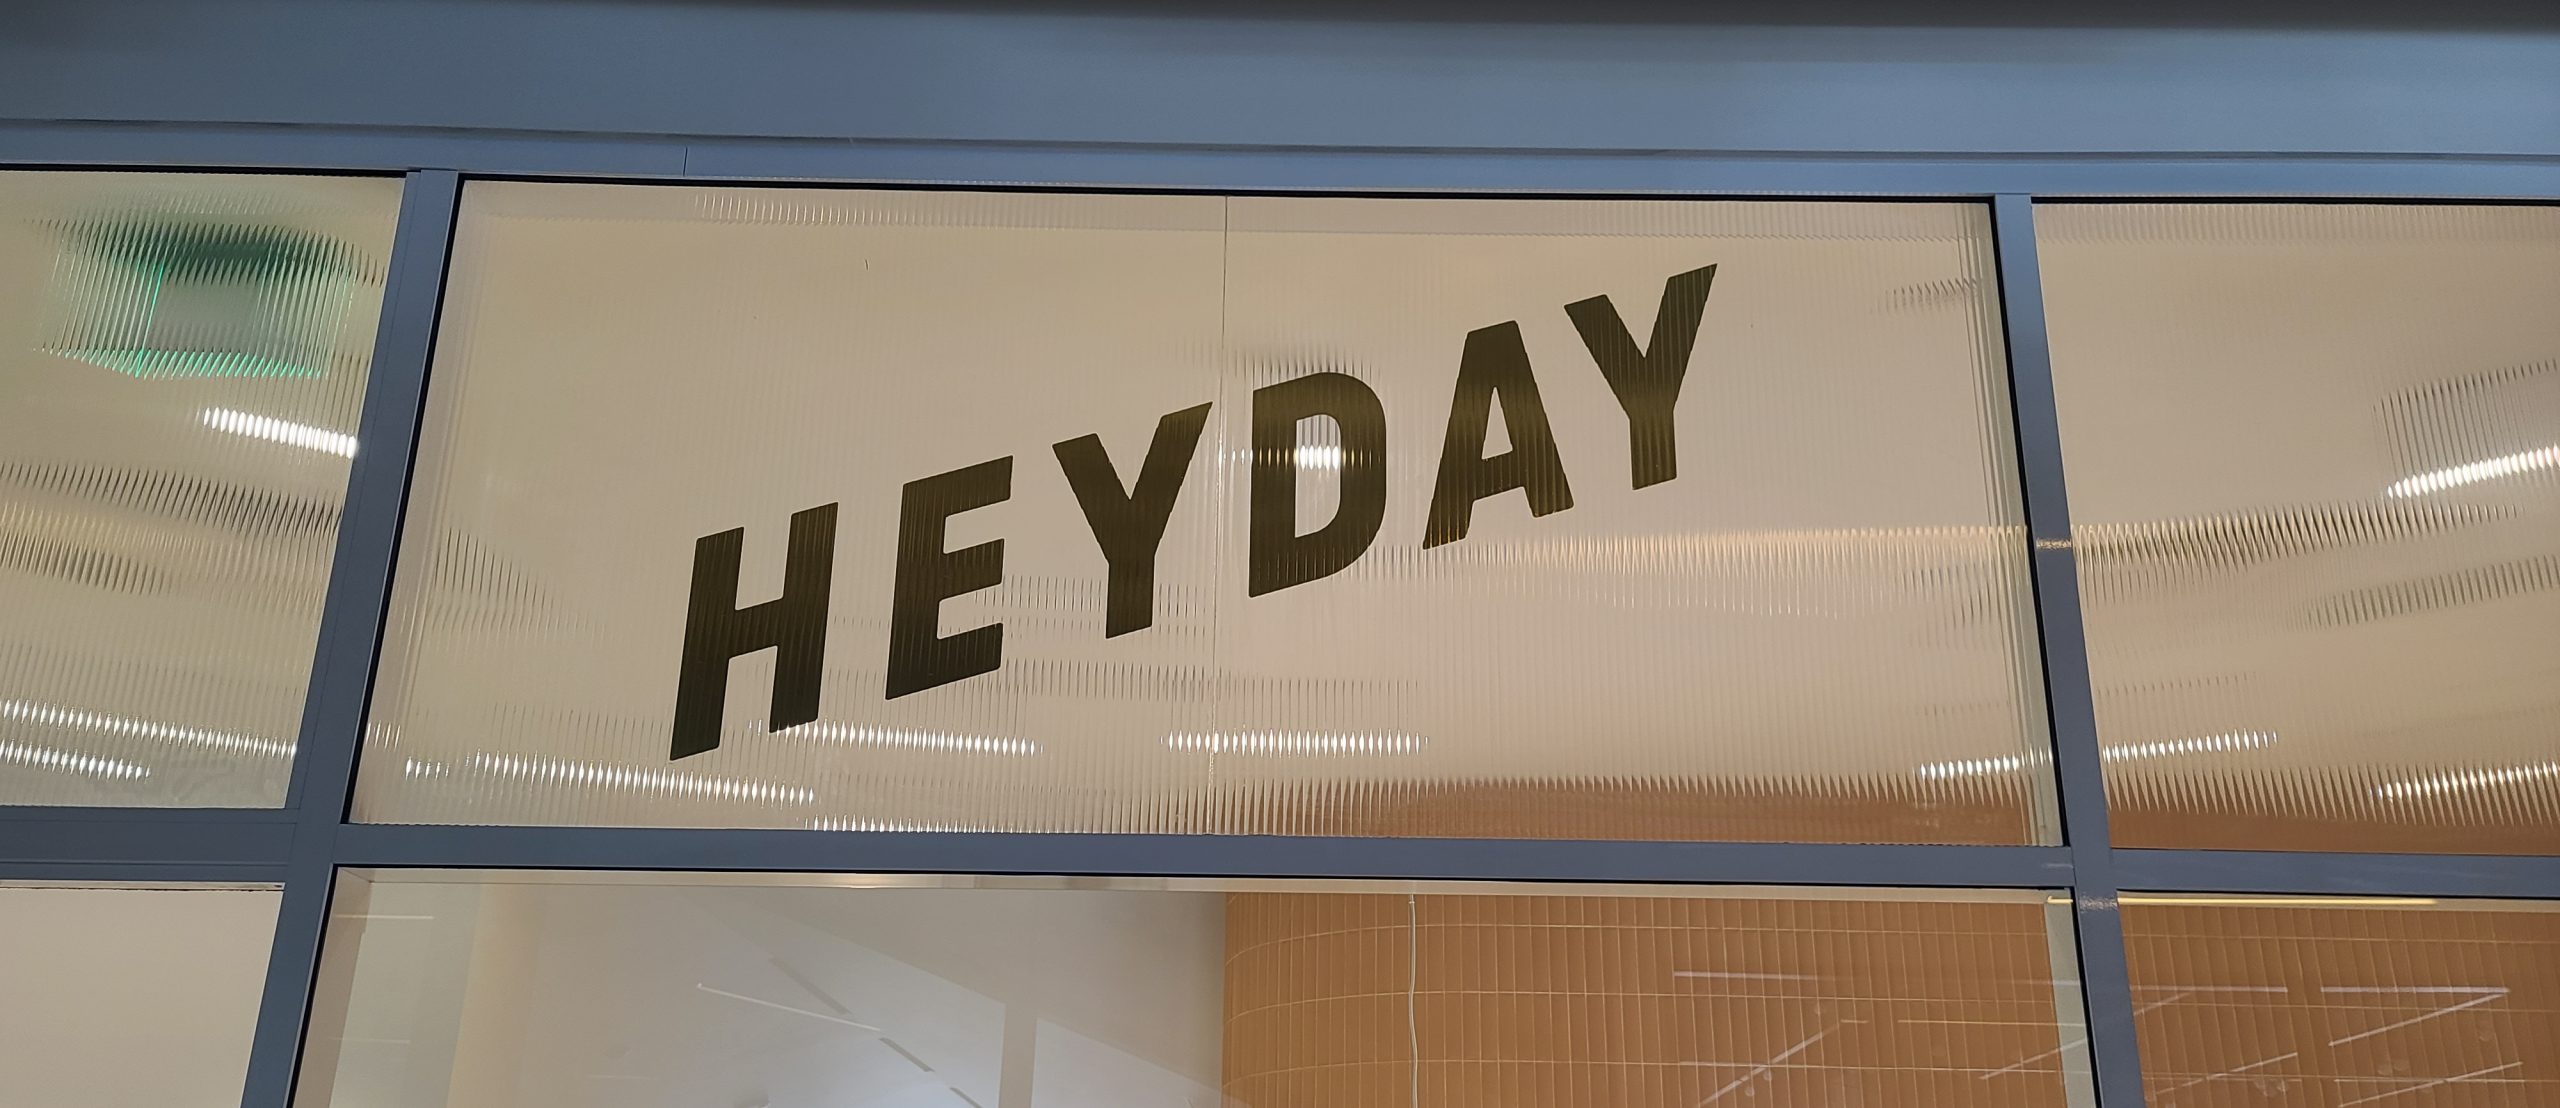 You are currently viewing Window Graphics for Heyday in Los Angeles